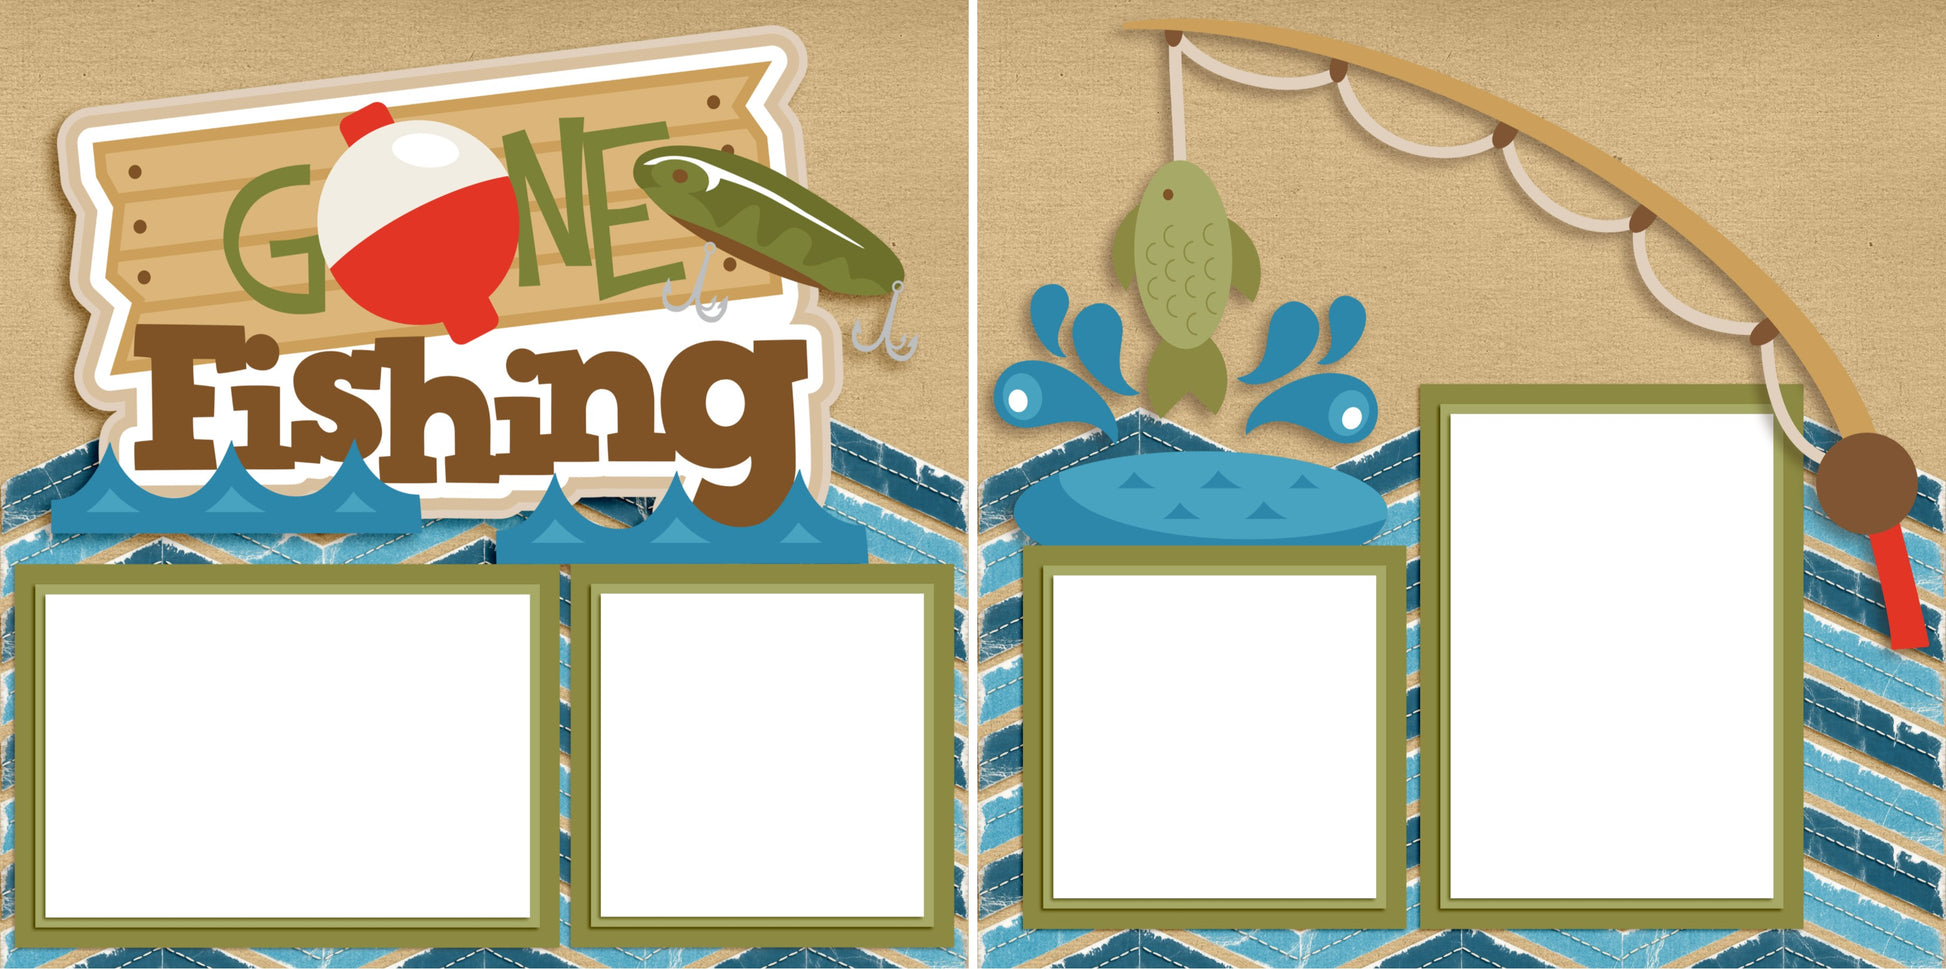 Gone Fishing - Digital Scrapbook Pages - INSTANT DOWNLOAD - 2019 - EZscrapbooks Scrapbook Layouts Hunting - Fishing